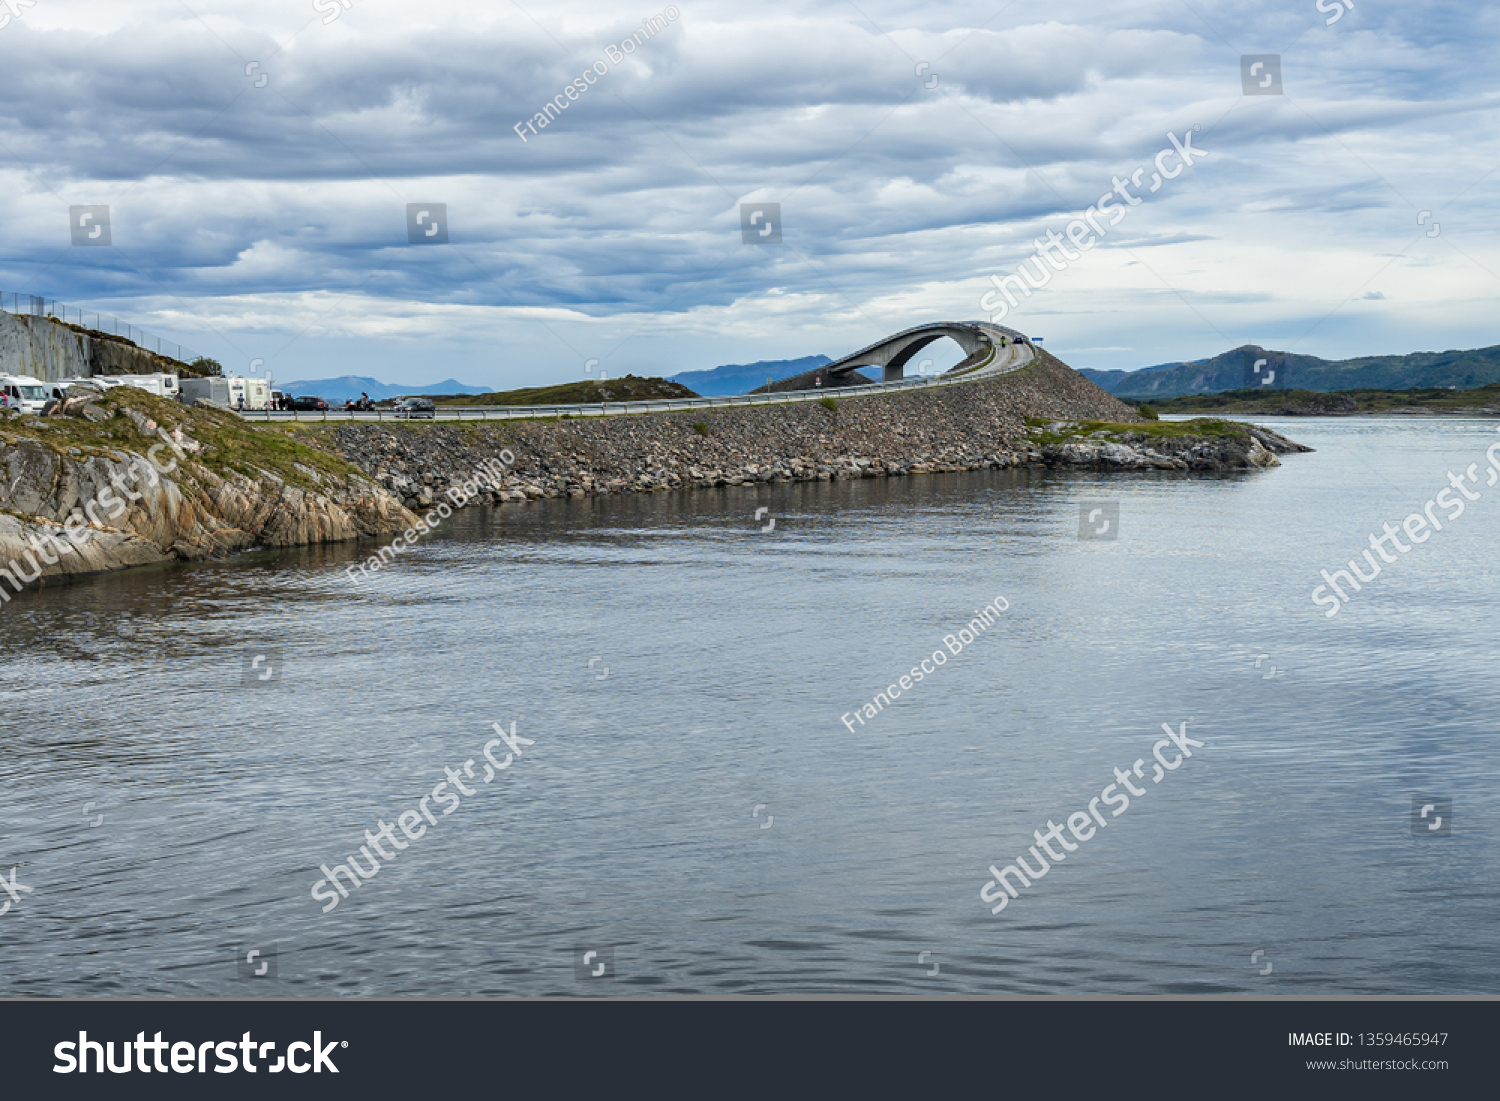 Atlantic Road with the famous Storseisundet Bridge popular site to film automotive commercials, More og Romsdal, Norway #1359465947